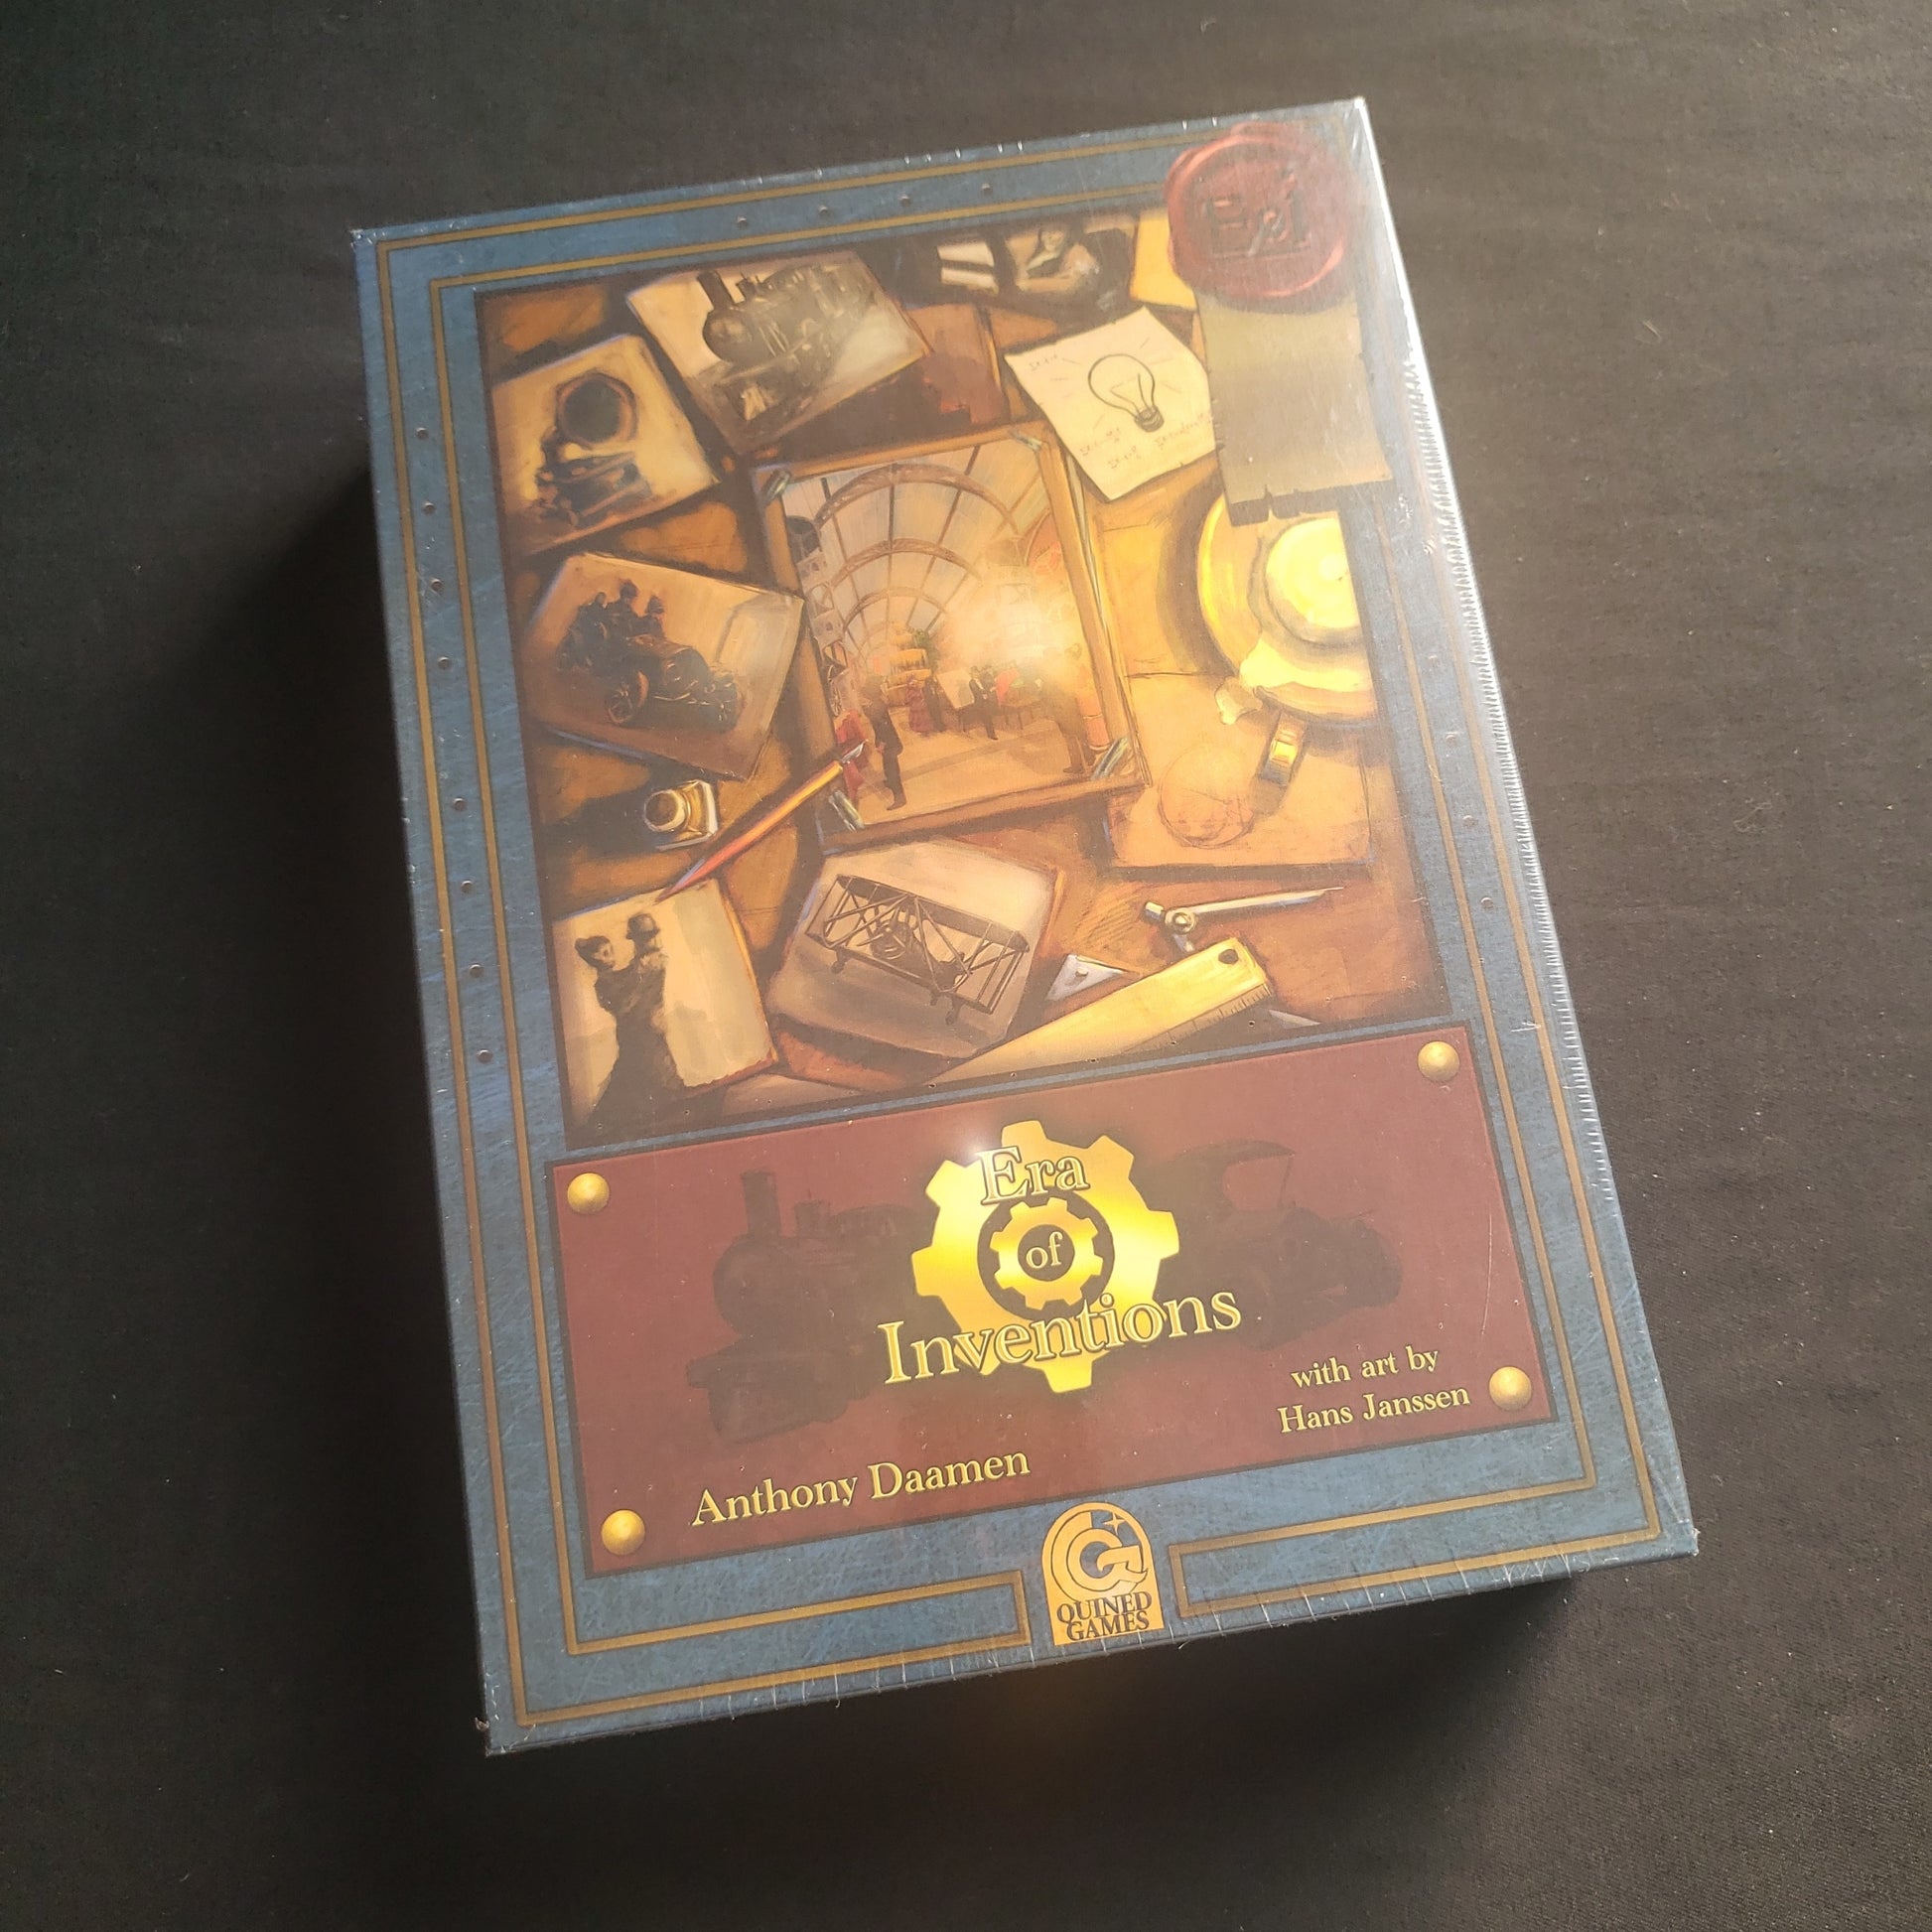 Image shows the front cover of the box of the Era of Inventions board game